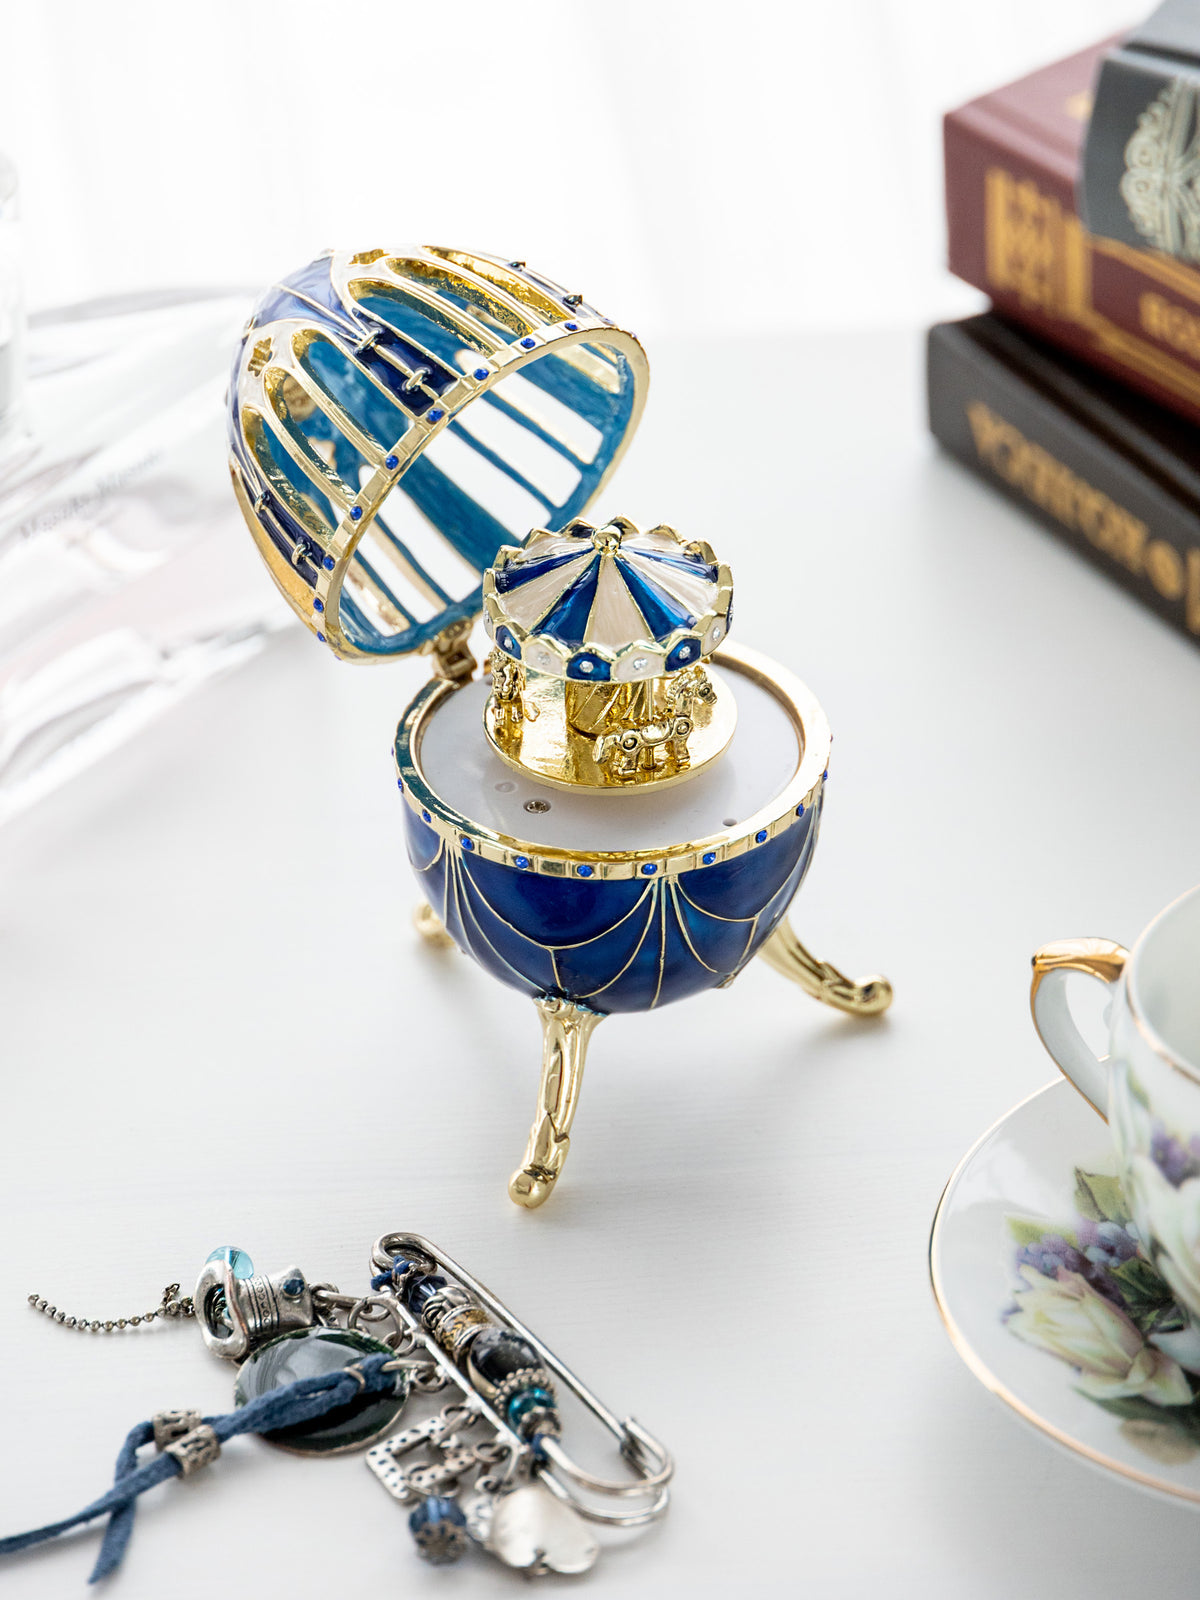 Blue and Gold Faberge Egg with Horse Carousel Surprise Inside